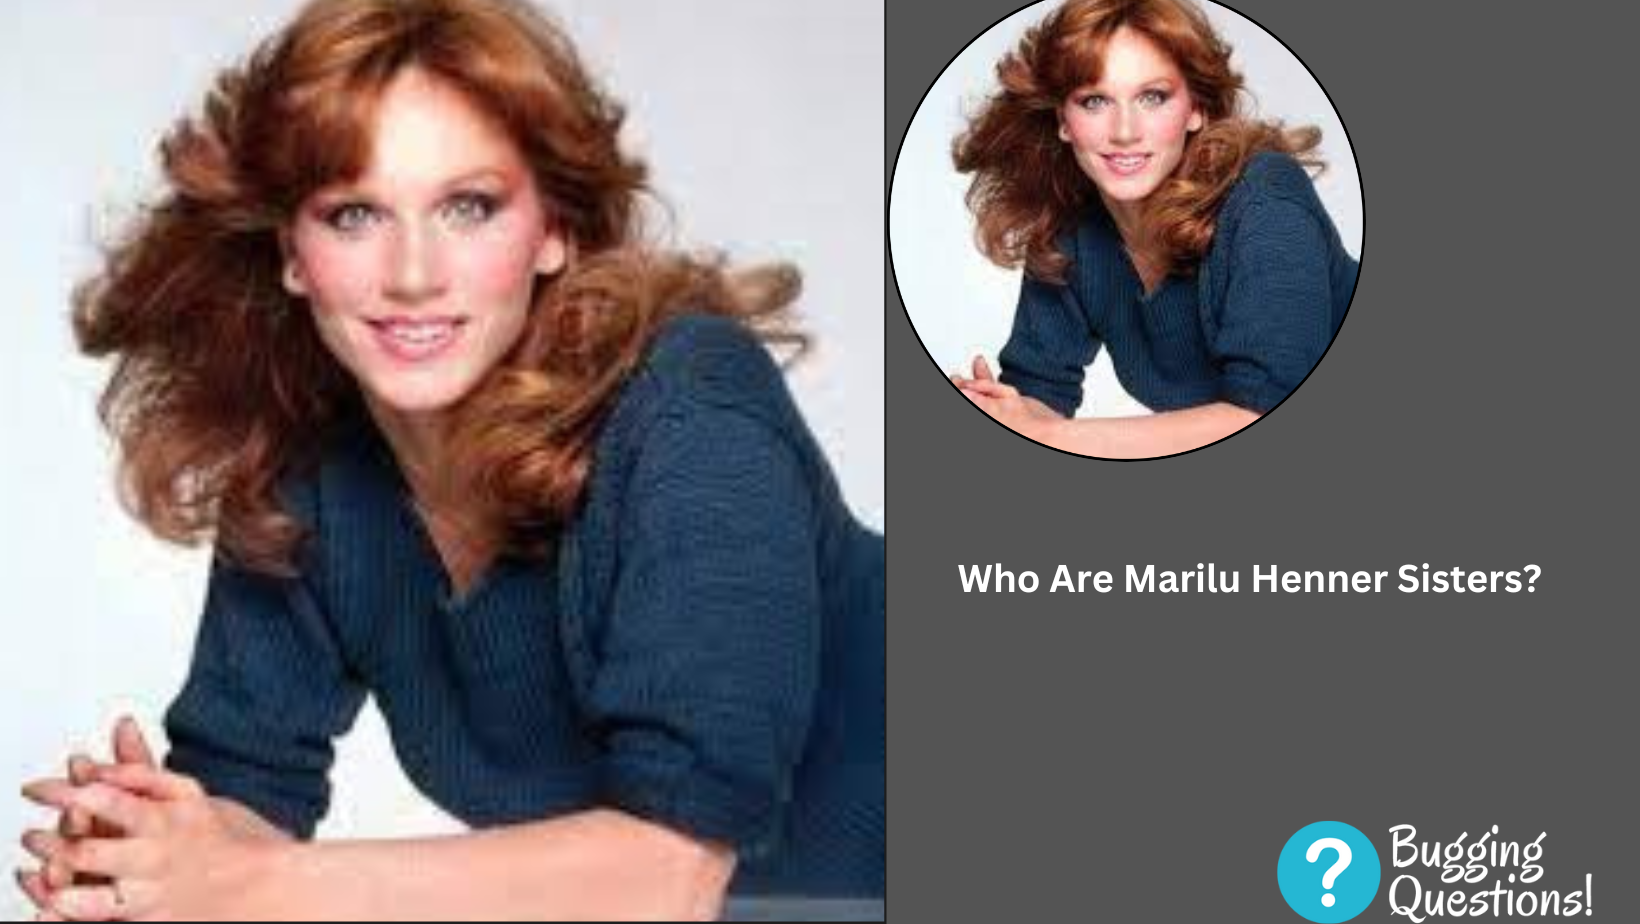 Who Are Marilu Henner Sisters?